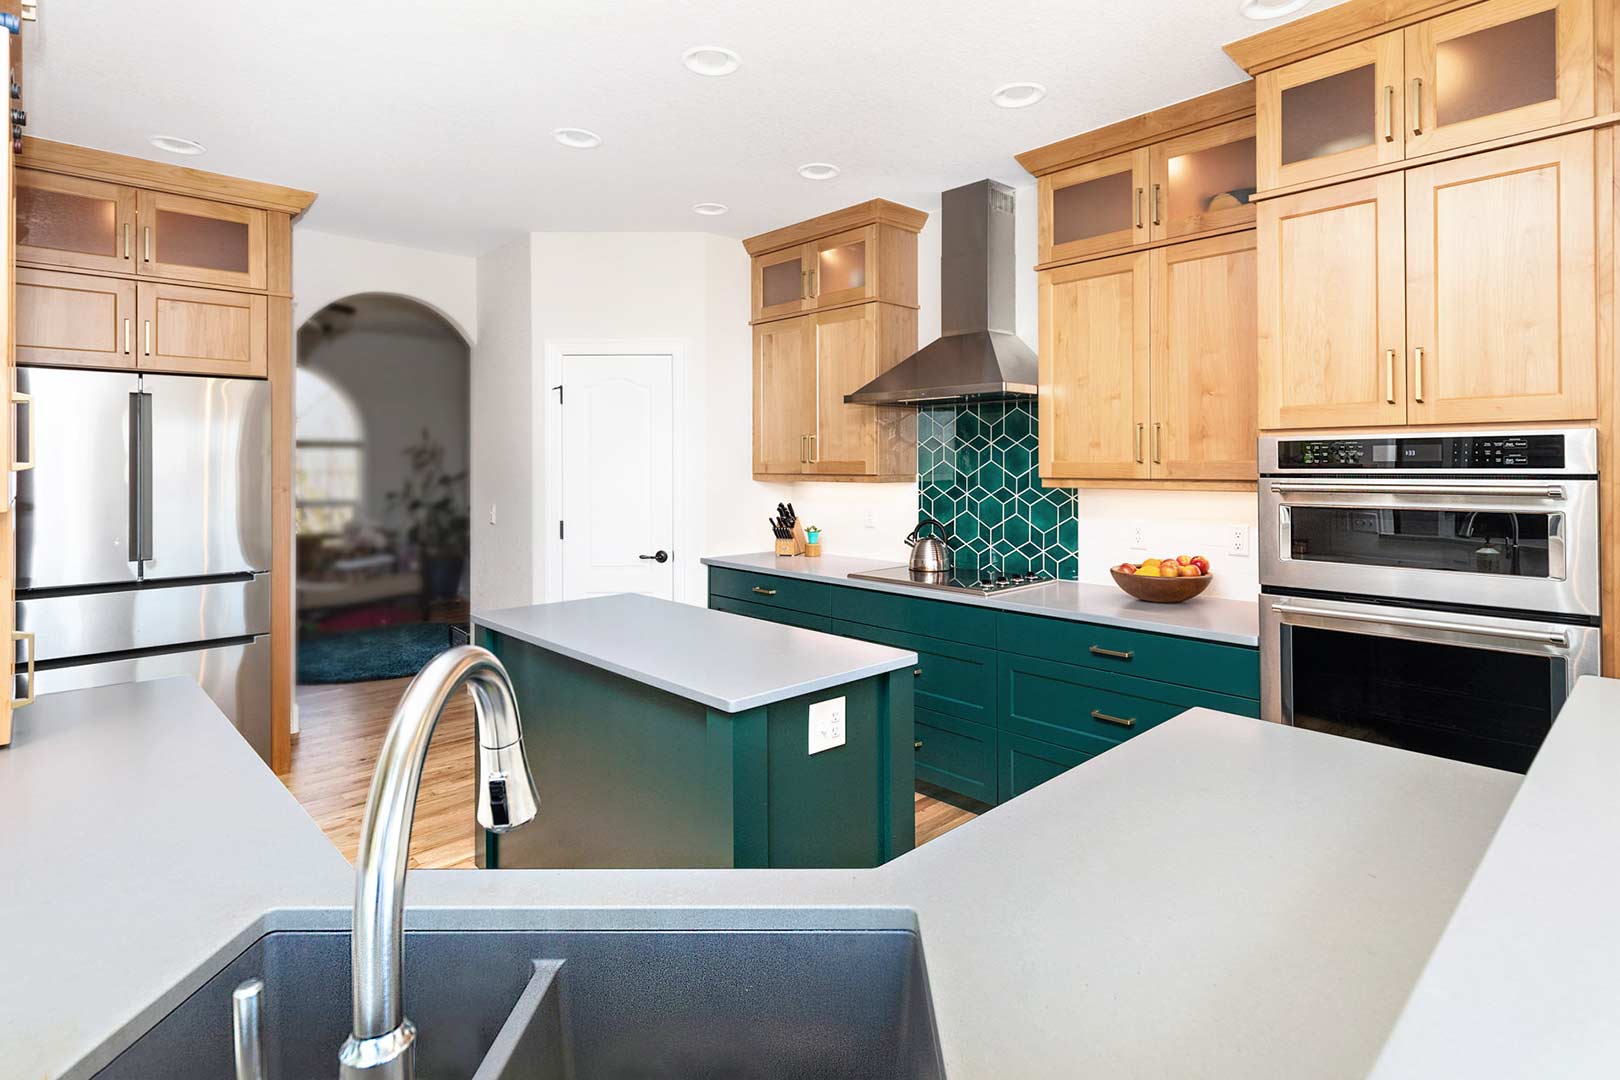 Wide angle view of the Bridget lane kitchen overlooking the modern sink and faucet into the kitchen.